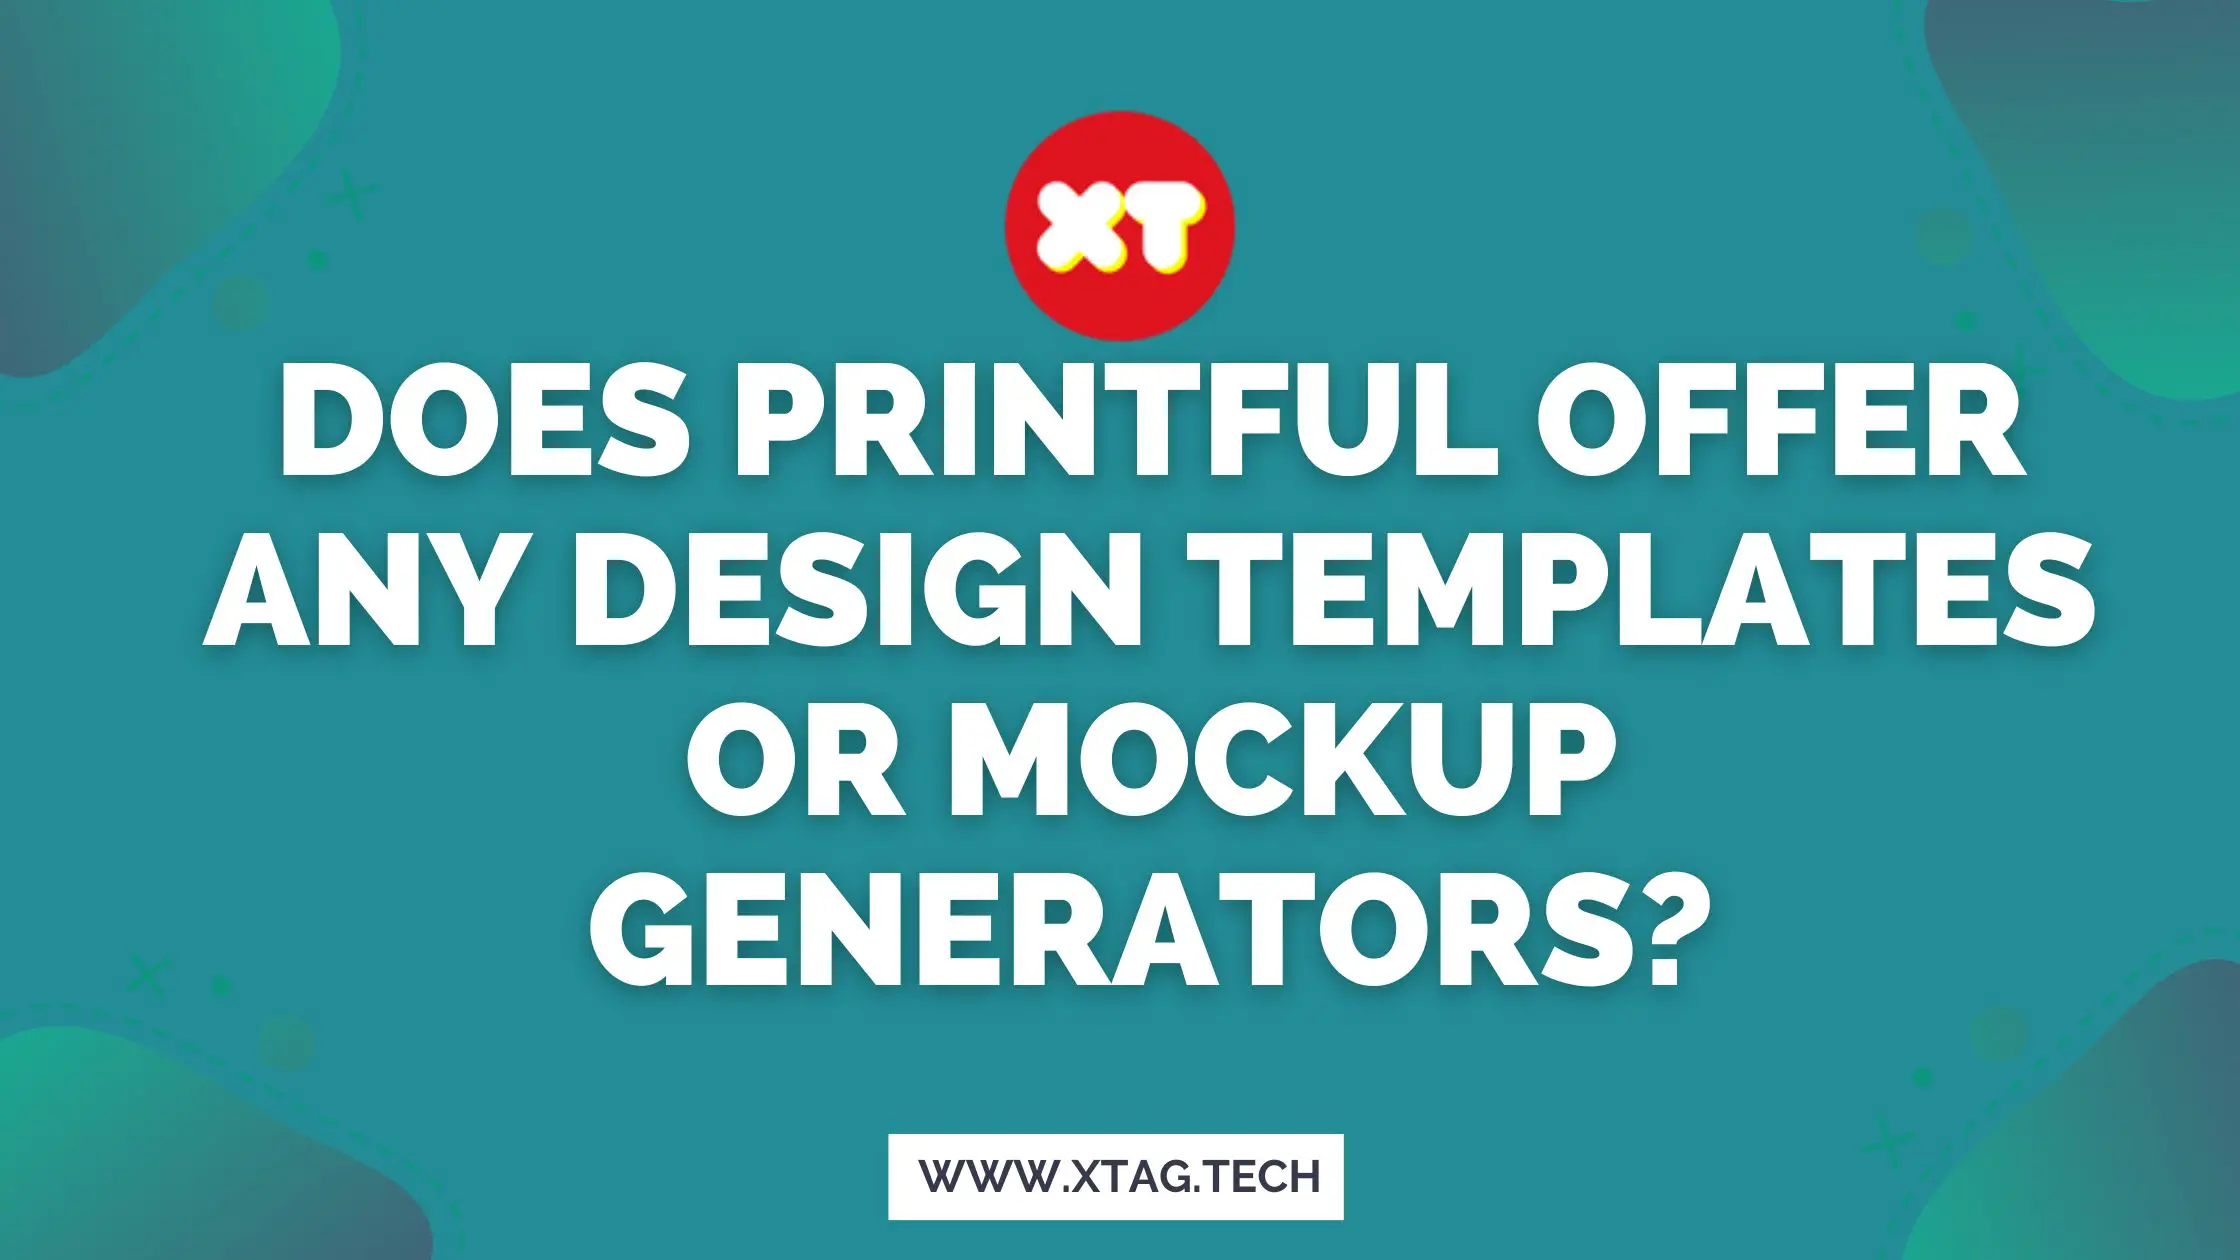 Does Printful Offer Any Design Templates Or Mockup Generators?